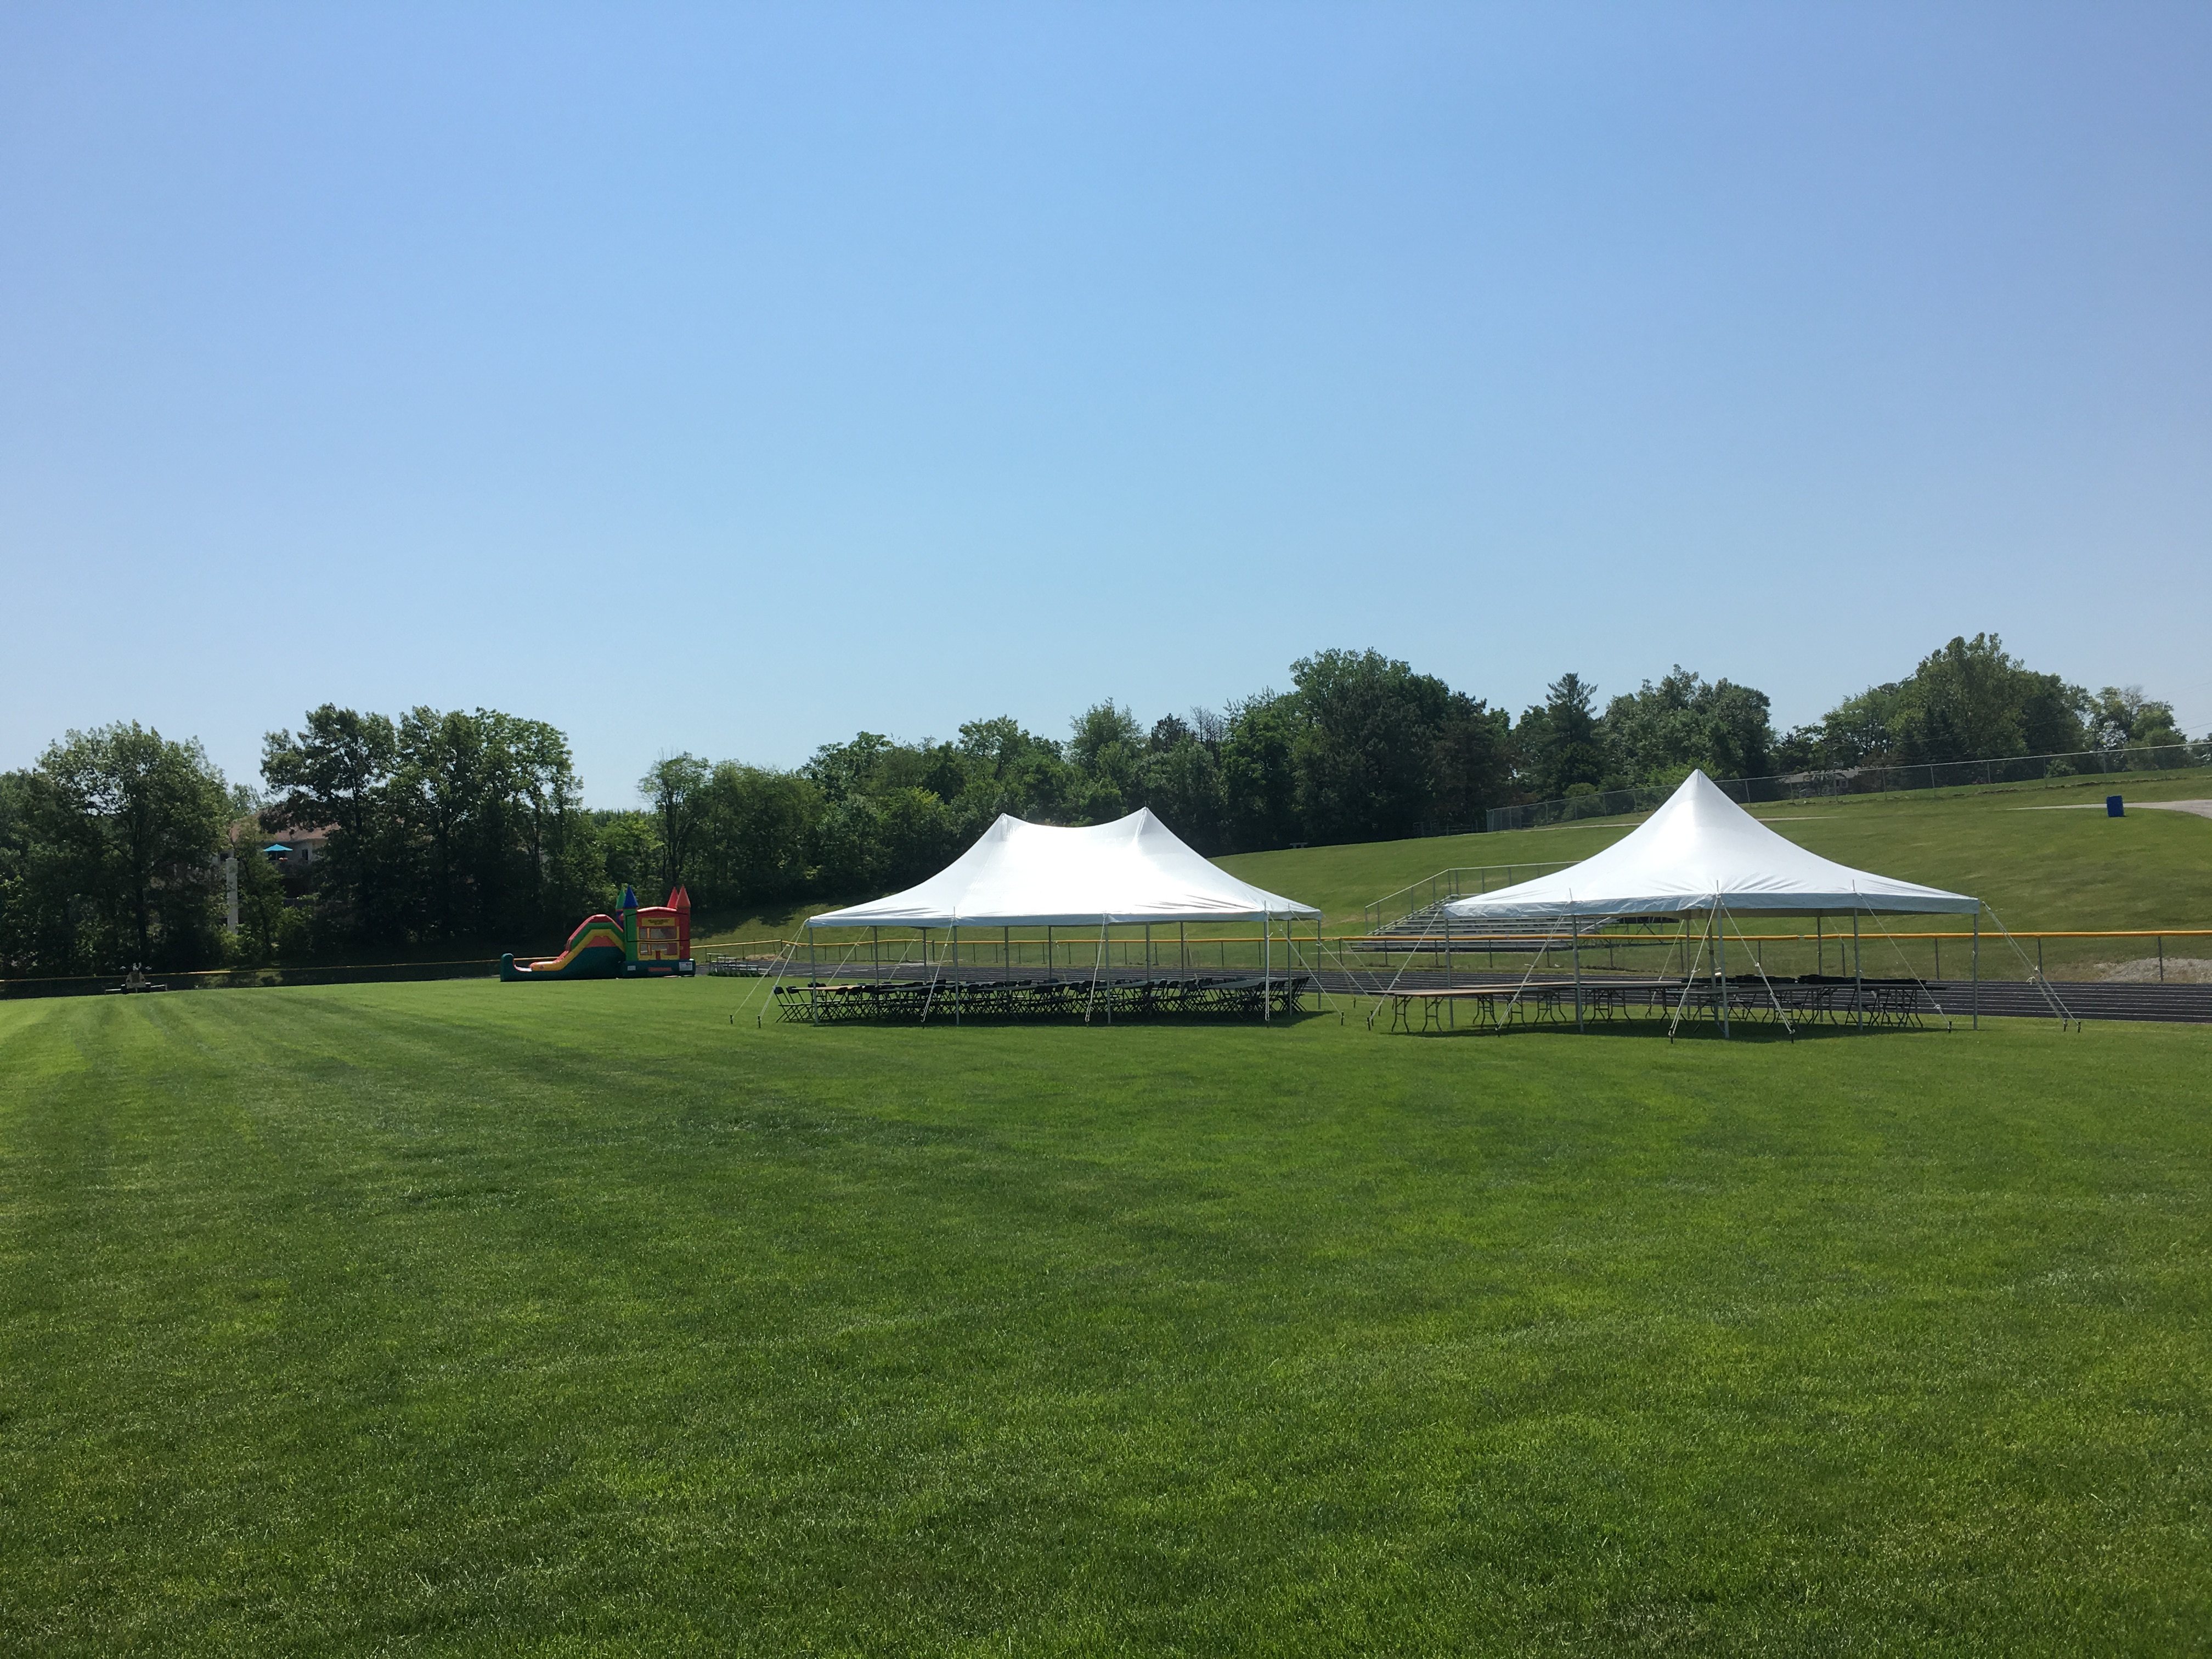 Bounce house (left), 20'x30' rope and pole tent (middle) and 20'x20' rope and pole tent (right)